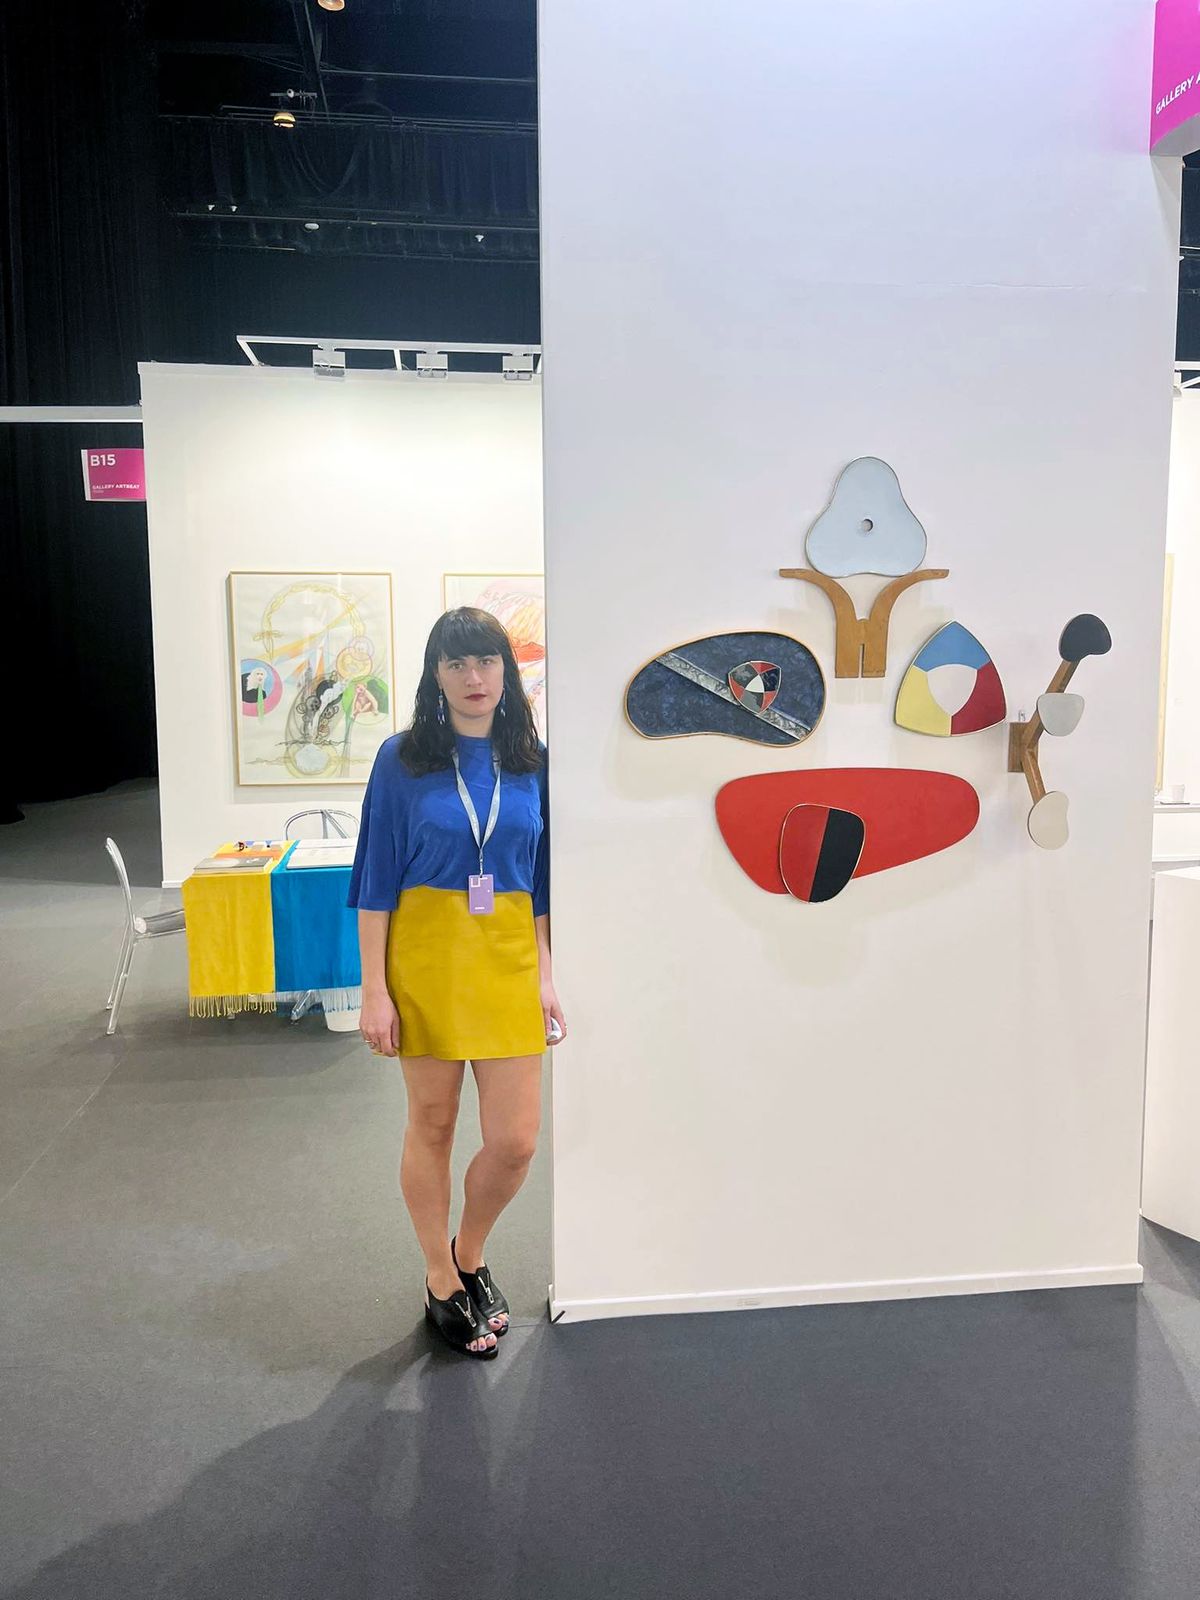 Natia Bukia, a co-founder of Gallery Artbeat, based in Tbilisi, Georgia, covered the booth table in a Ukrainian flag and wore Ukrainian colours for the VIP preview of Art Dubai Courtesy of Gallery Artbeat